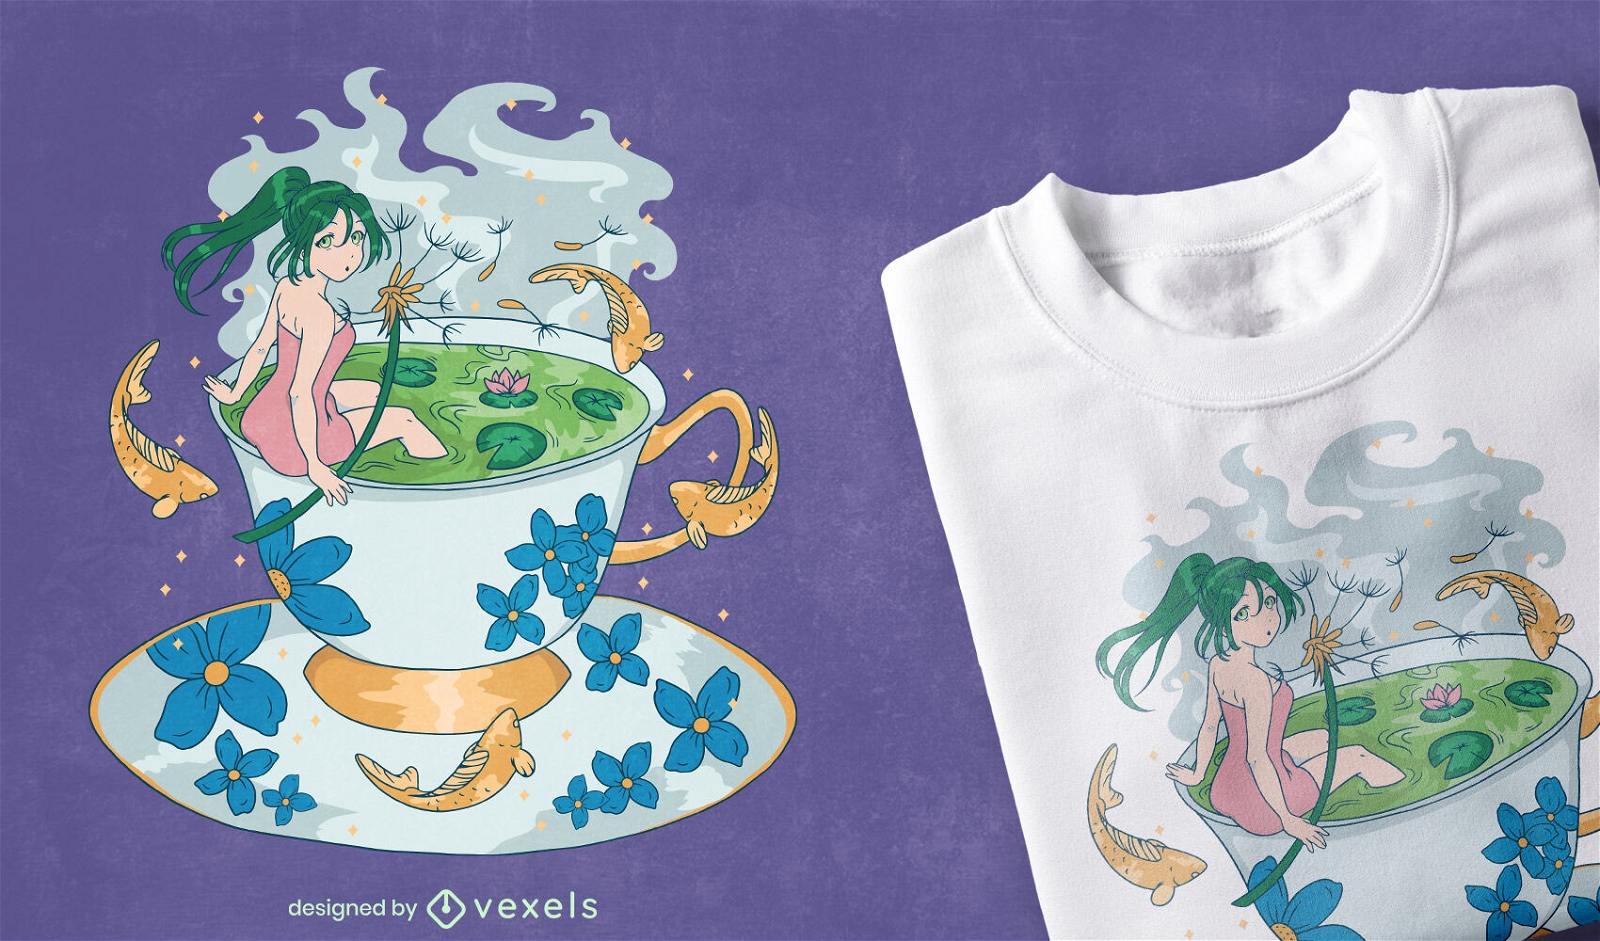 https://images.vexels.com/content/279024/preview/anime-girl-in-tea-cup-t-shirt-design-f15537.png